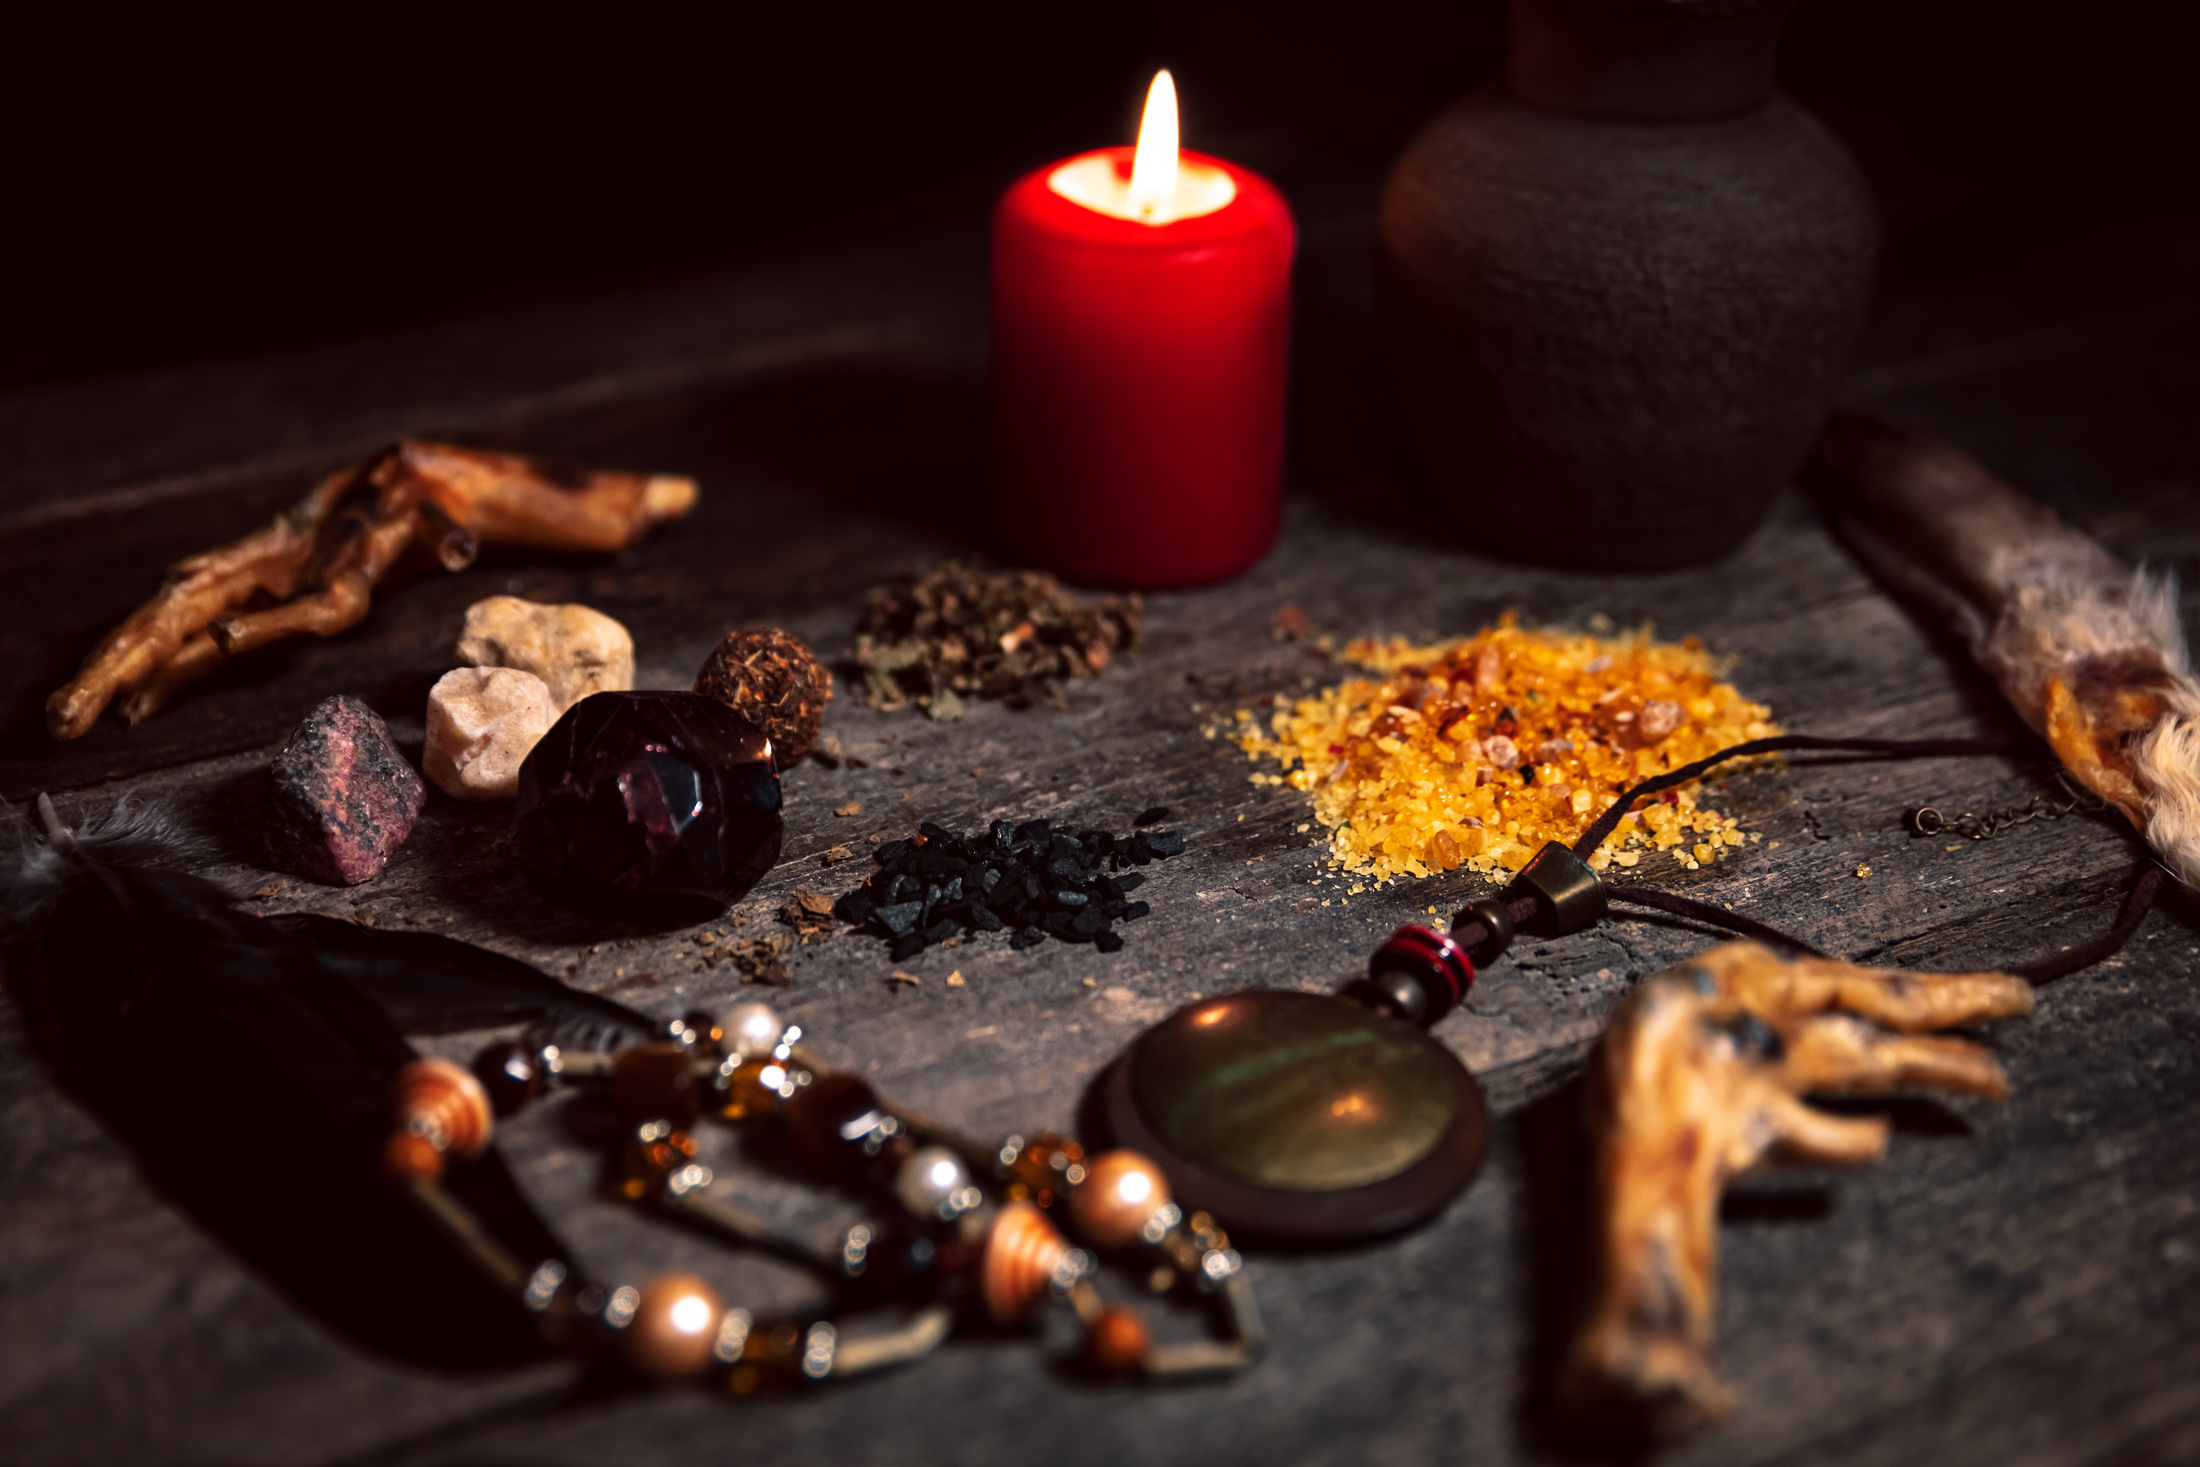 Voodoo or vodun ingredients for an dark ritual, witchcraft and african religion, talisman, incense, crow´s feet and gems